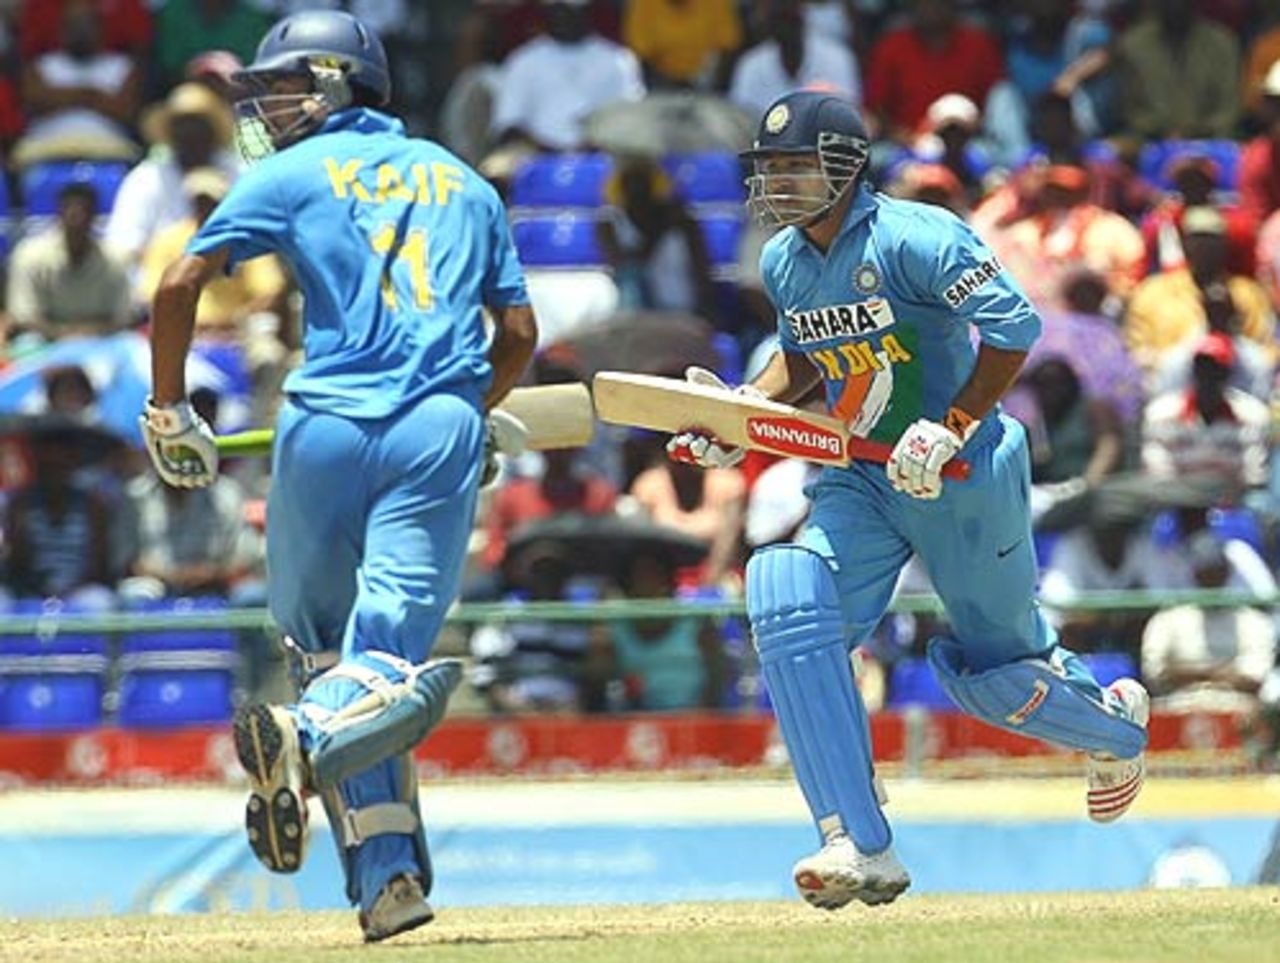 Virender Sehwag and Mohammad Kaif steal another run during their 112-run stand at the 3rd ODI, West Indies v India, St Kitts, May 23, 2006 
